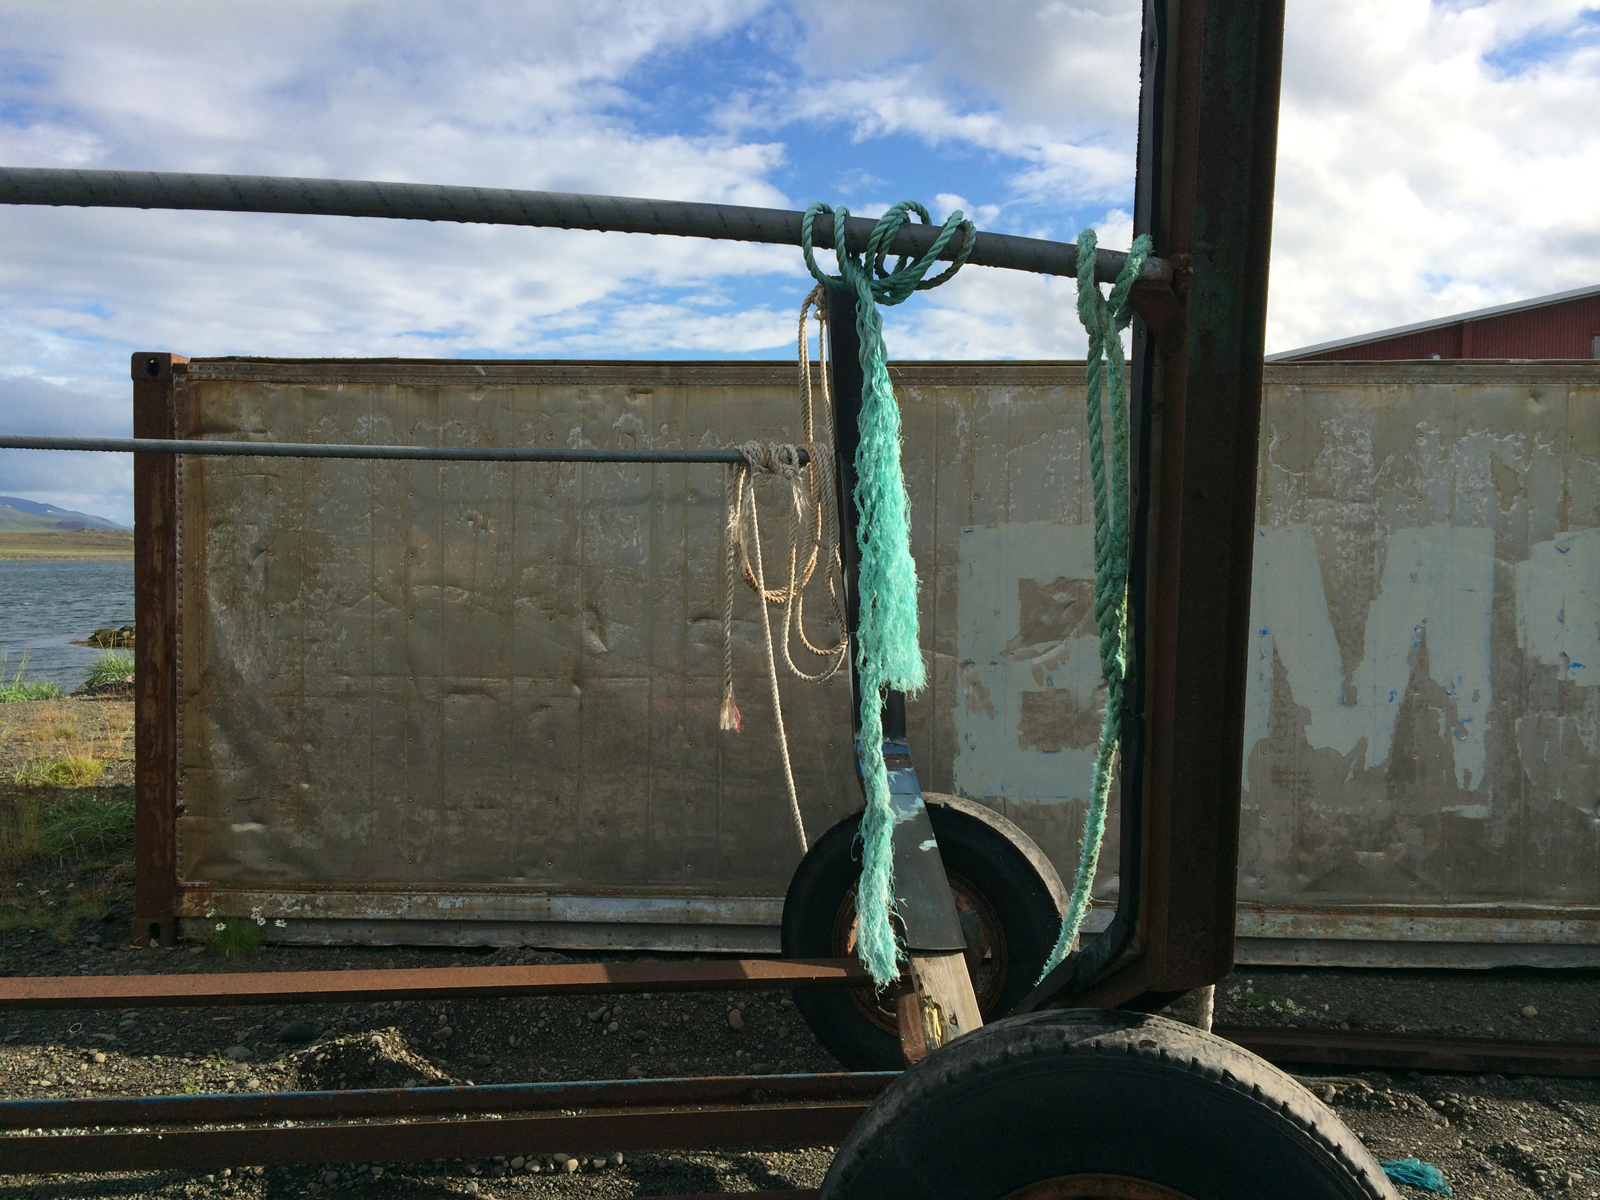 Frayed teal-colored and white rope hangs from an old rusty metal trailer frame.